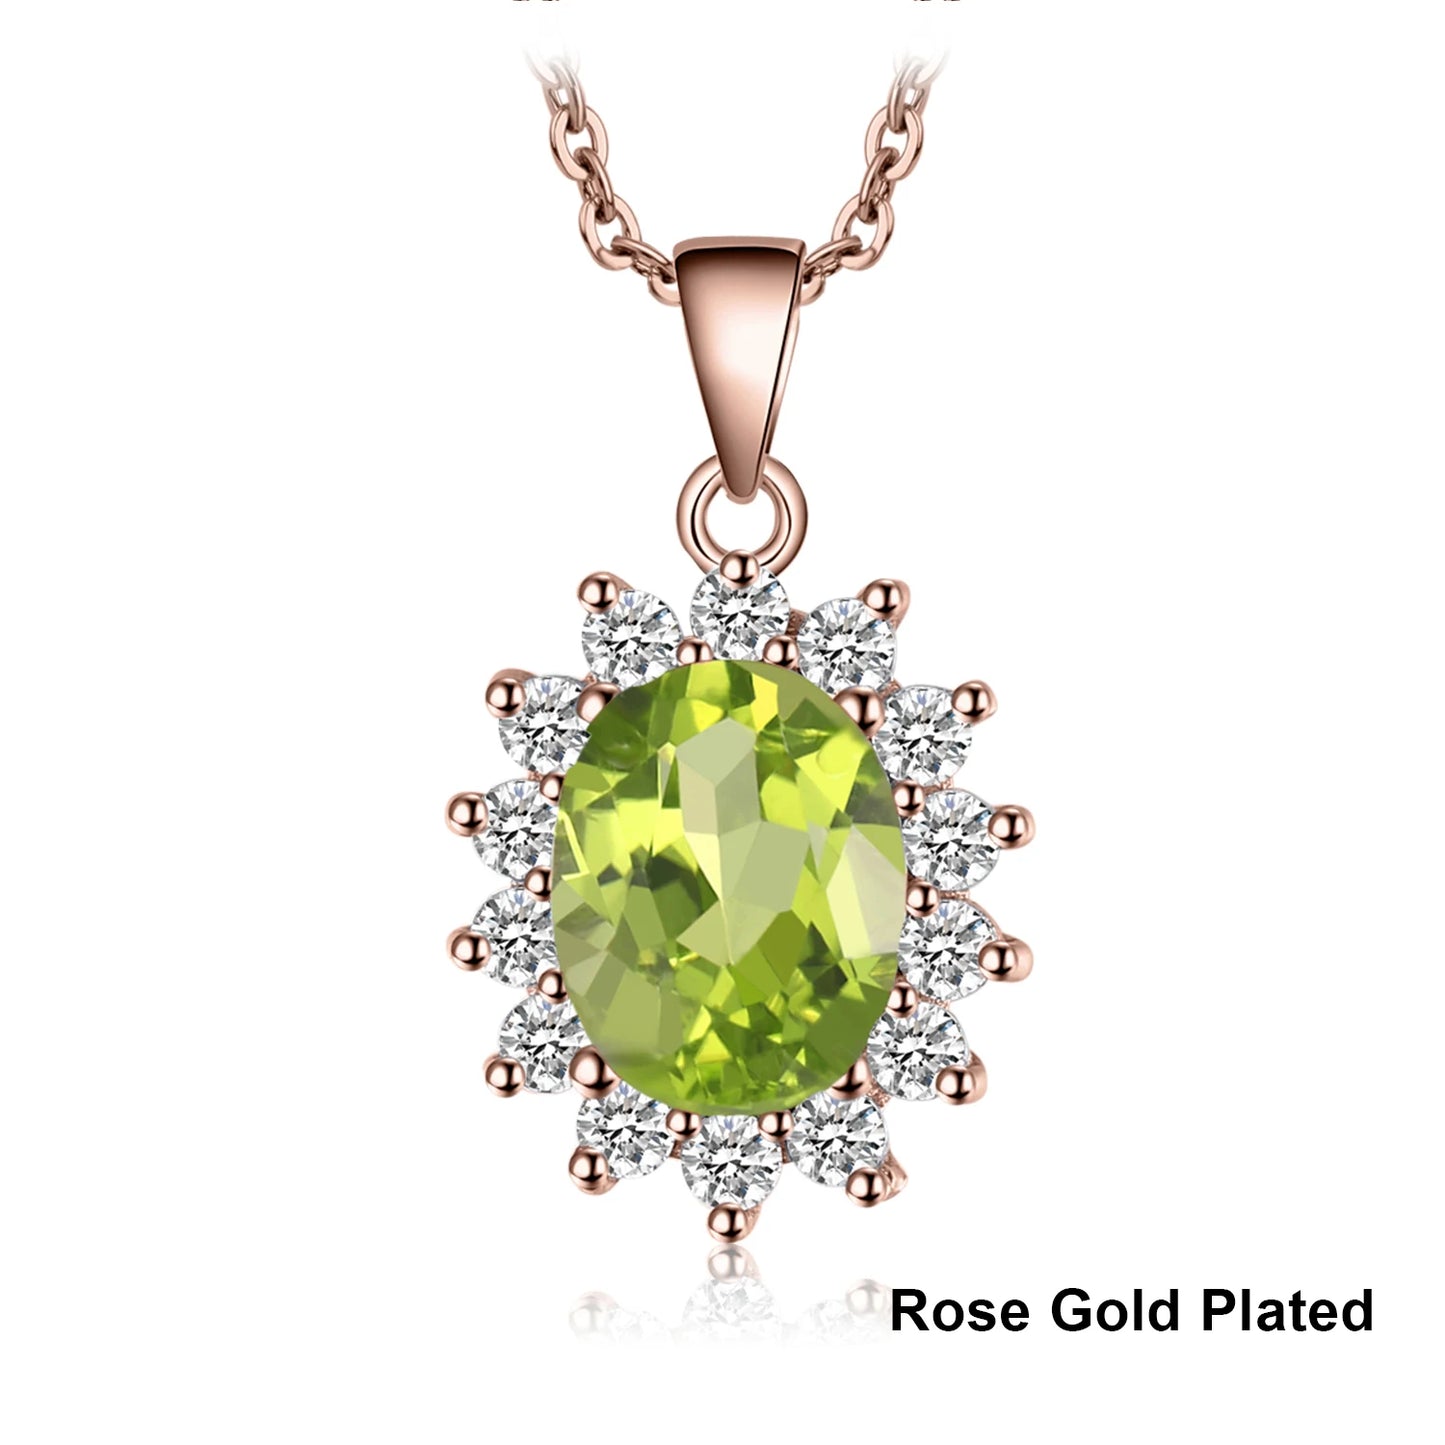 Jewelrypalace Created Alexandrite Natural Amethyst Garnet 925 Sterling Silver Pendant Necklace No Chain Yellow Rose Gold Plated